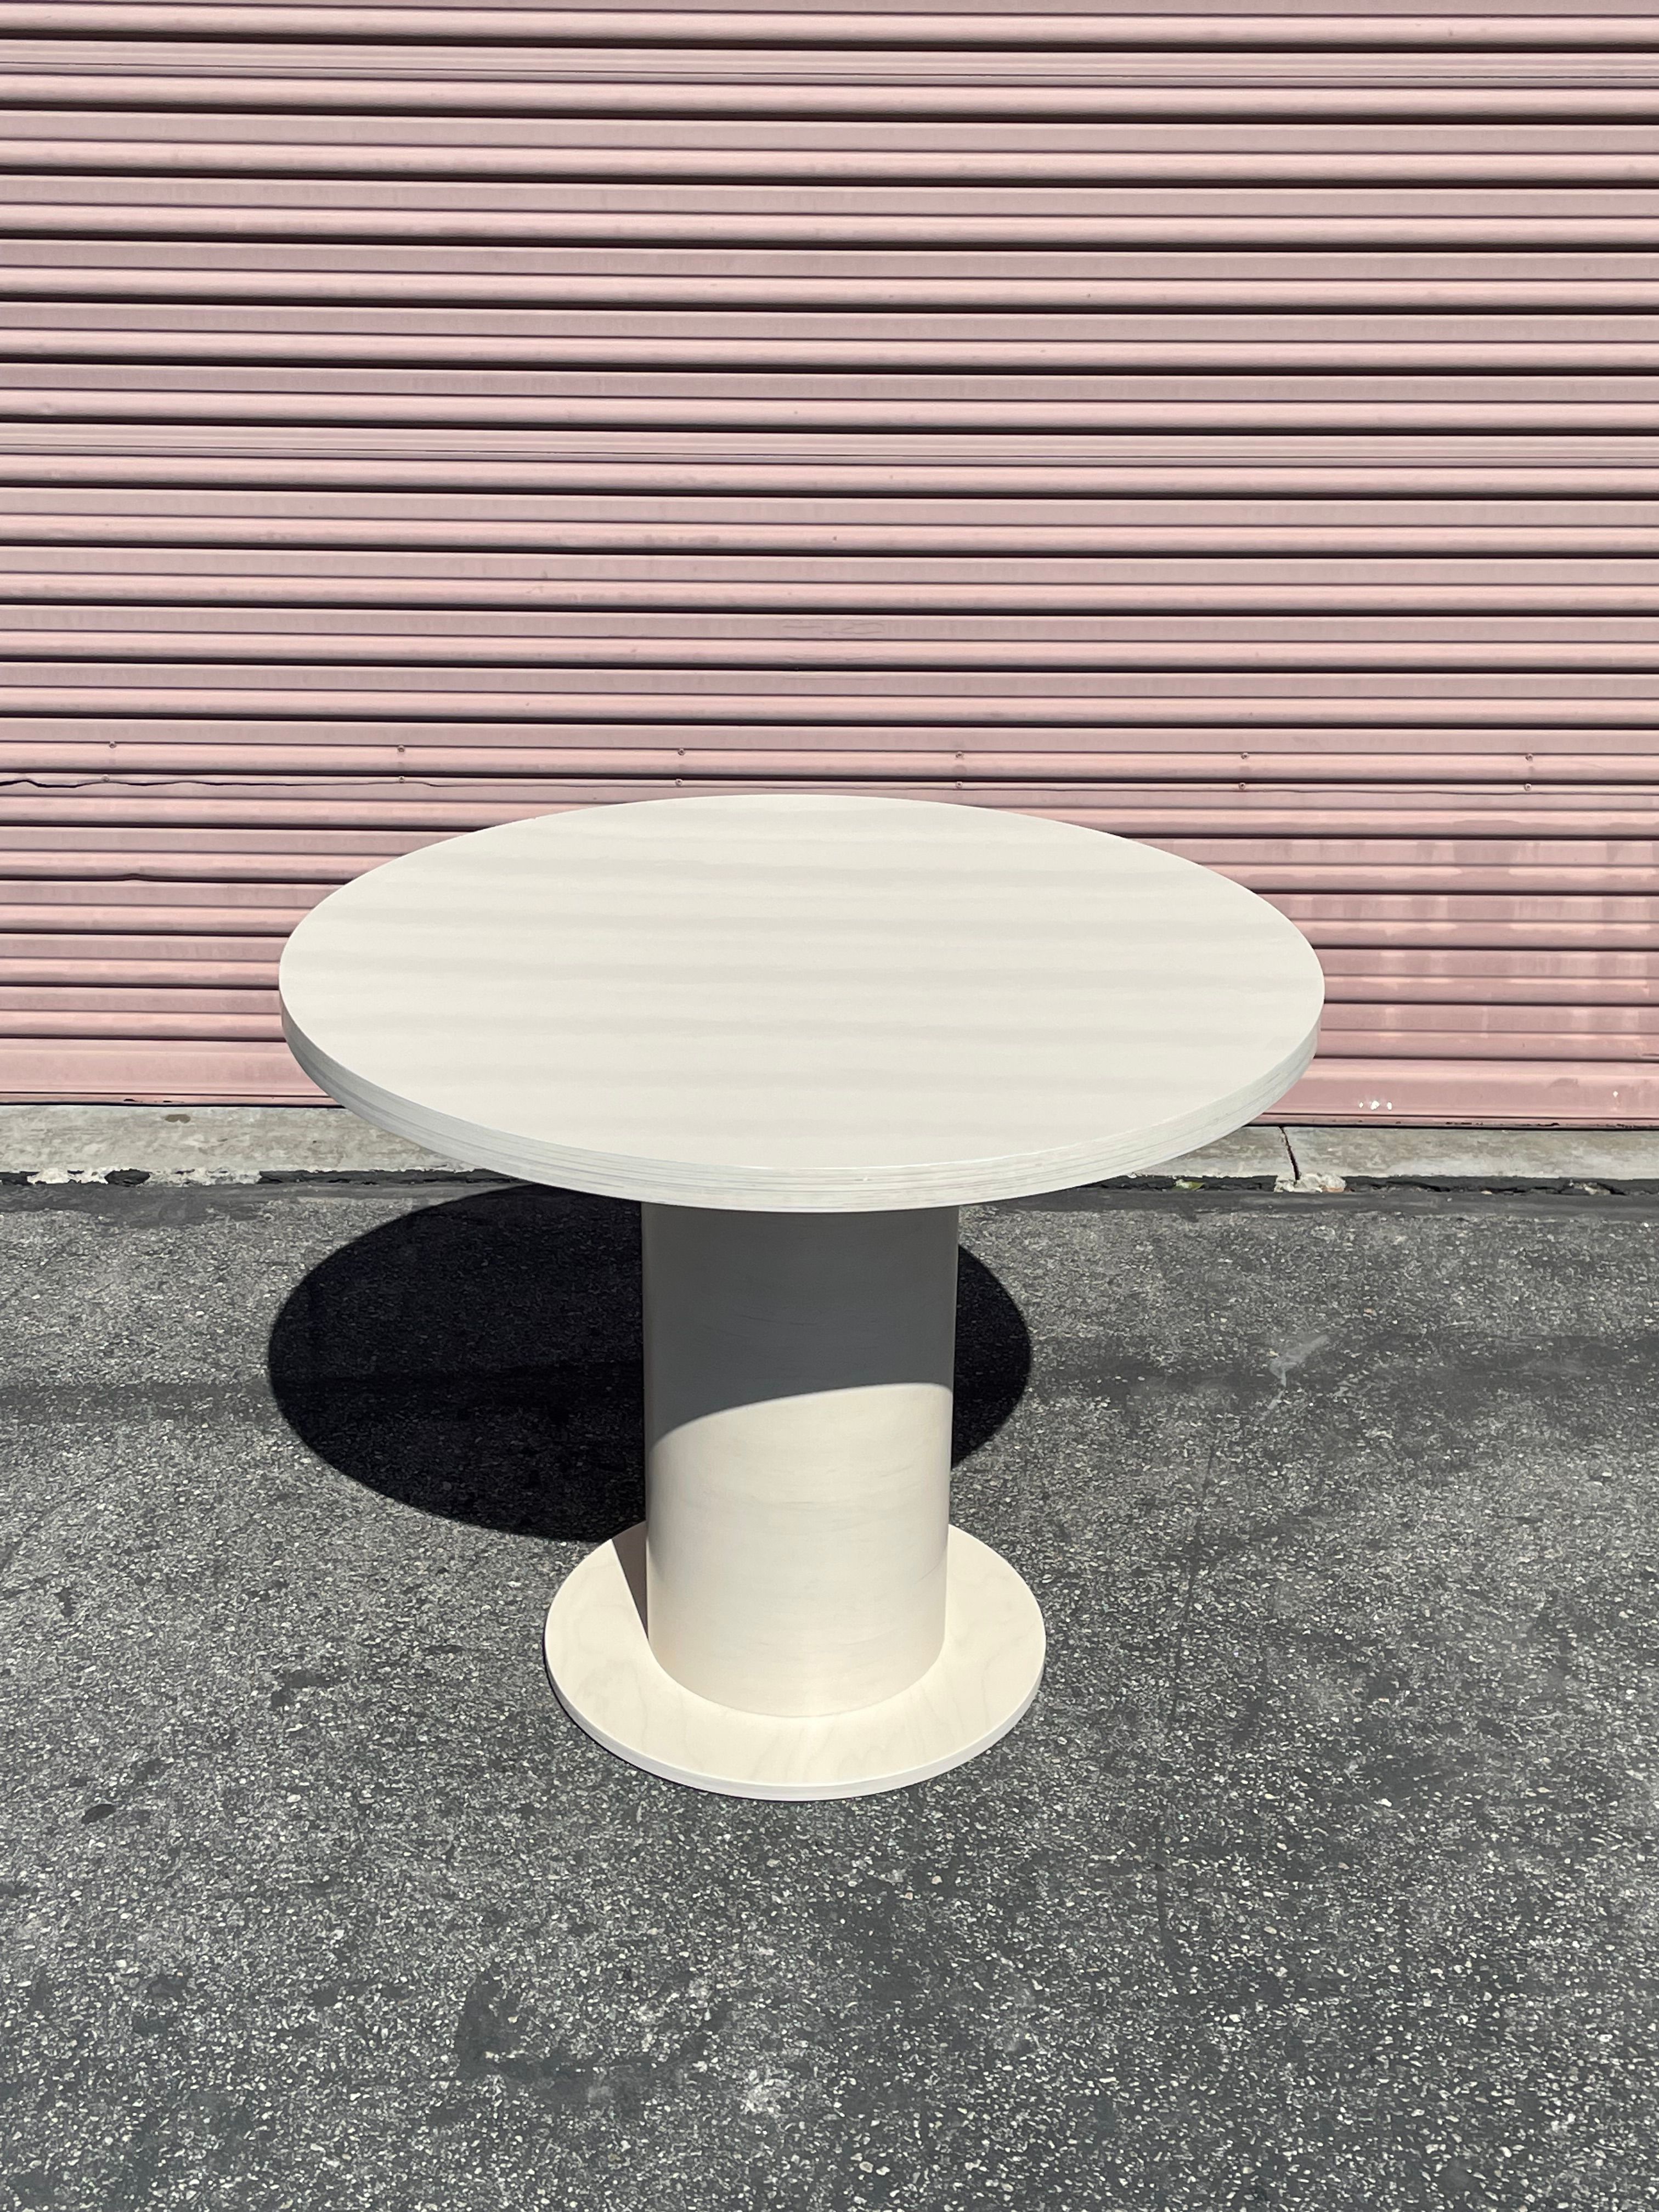  High Gloss Pedestal Table - White Stain product image 3